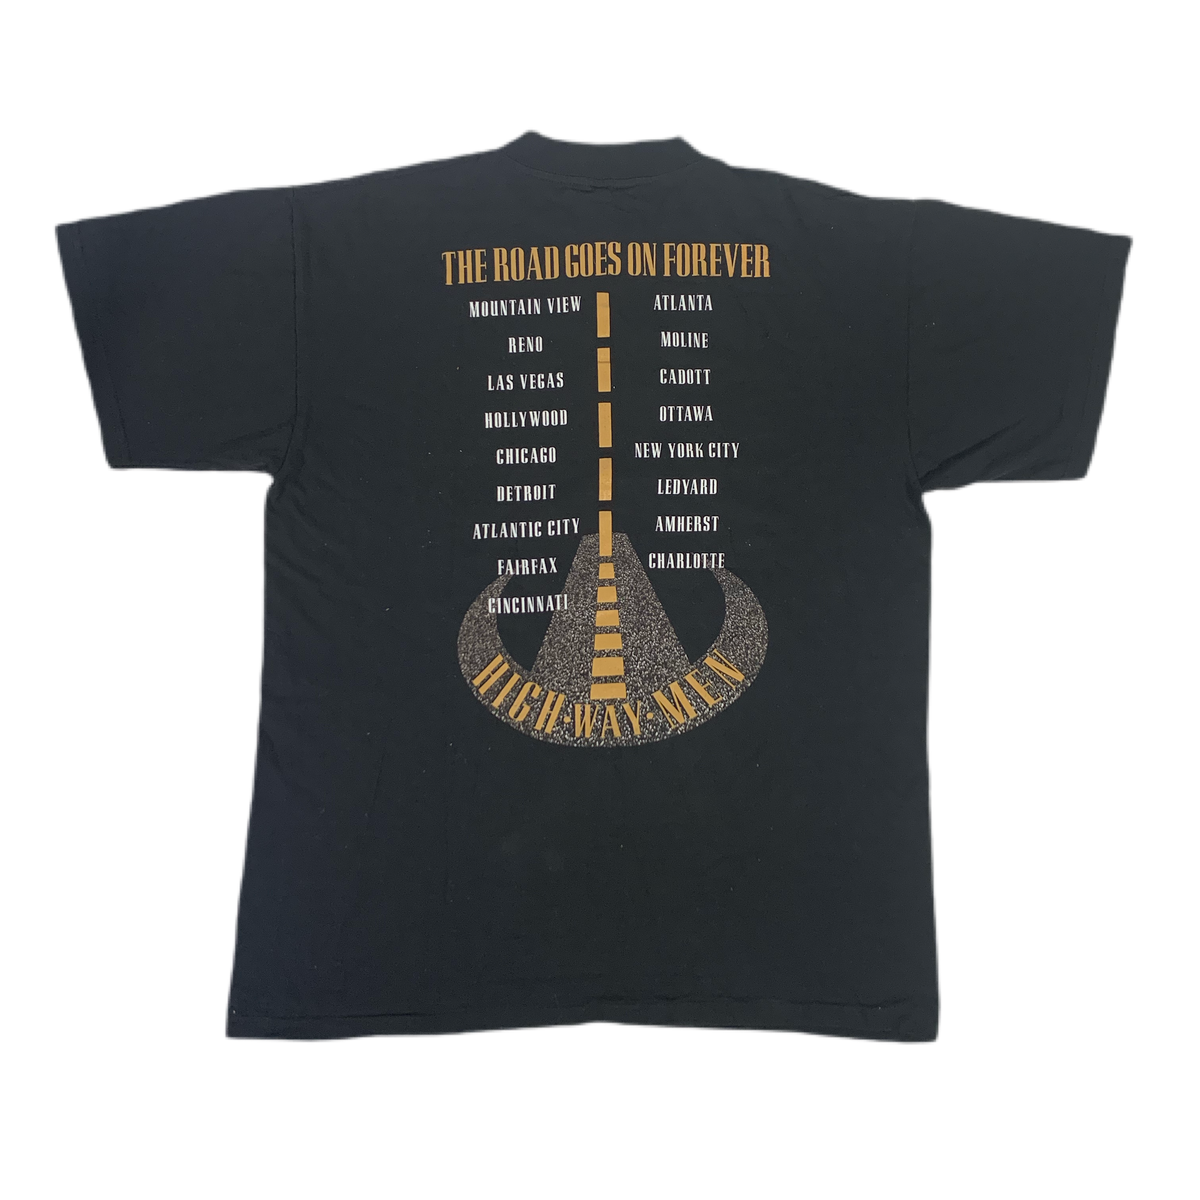 Vintage Highwaymen &quot;The Road Goes On Forever&quot; T-Shirt